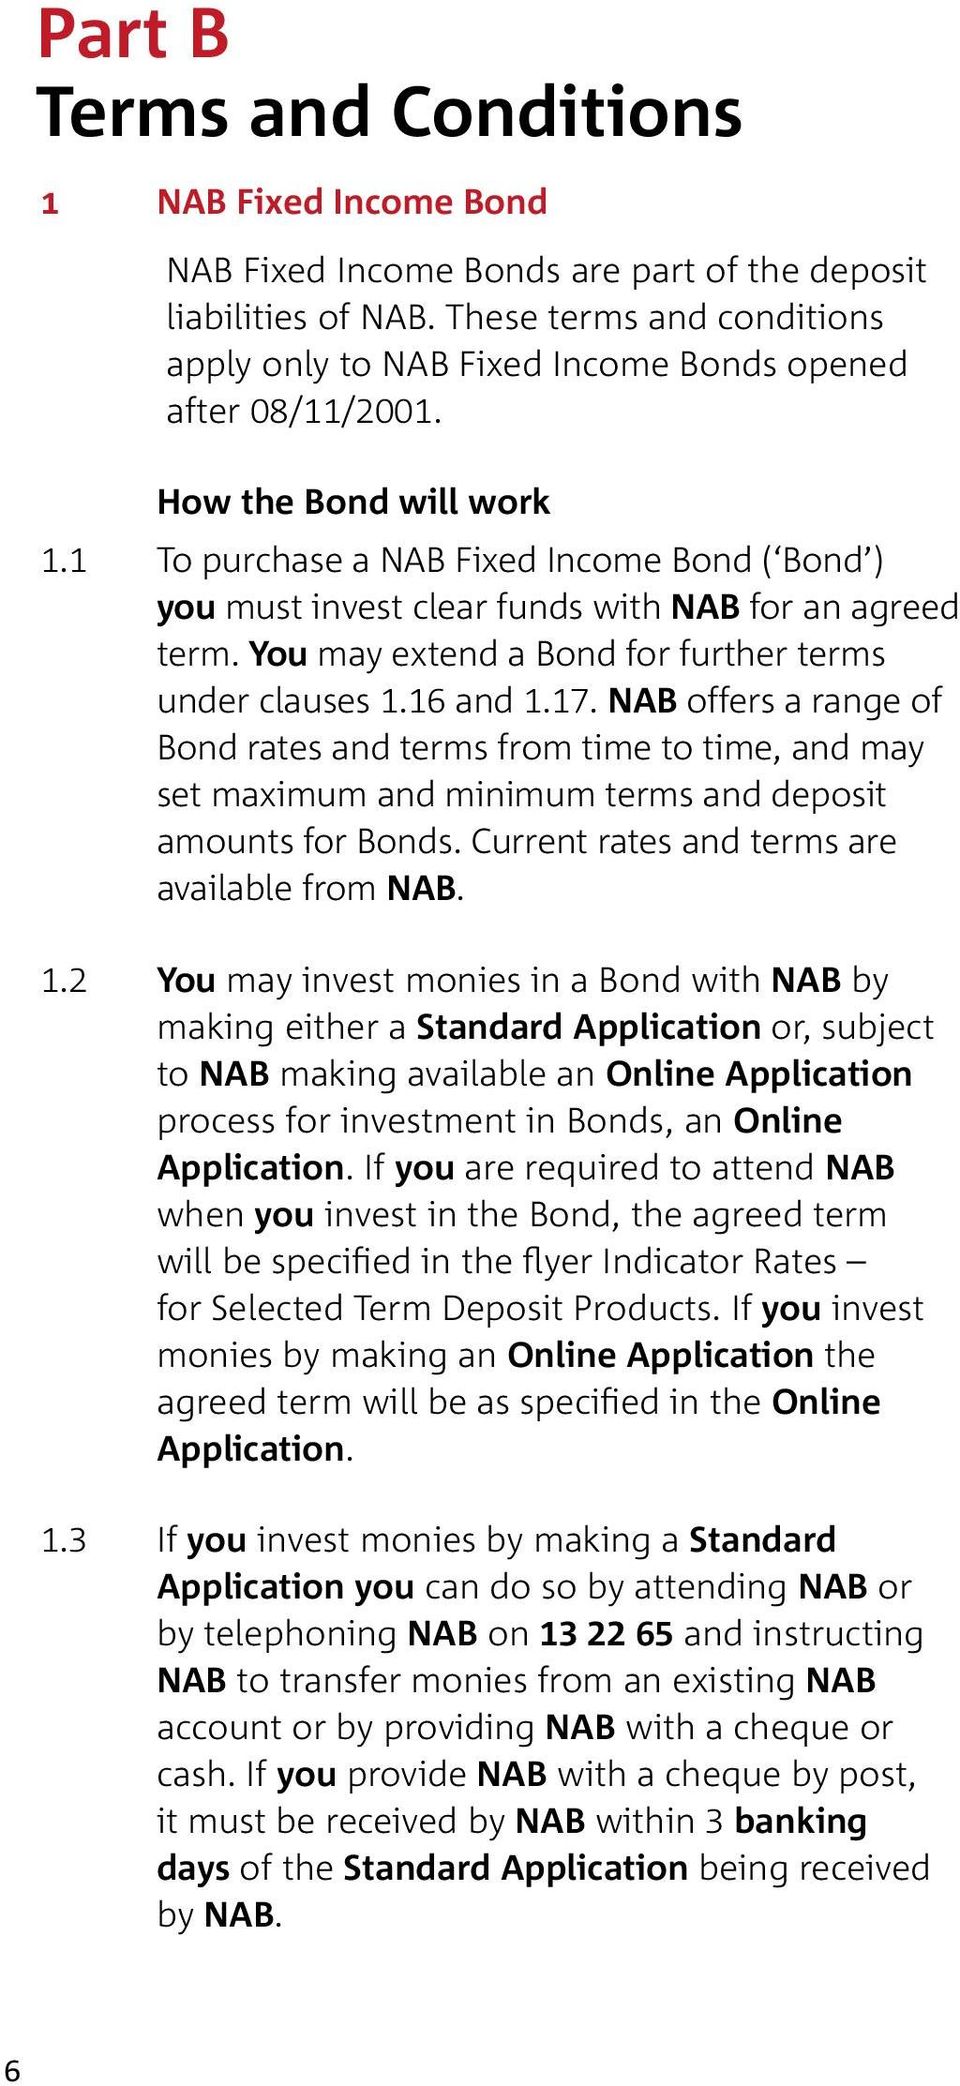 1 To purchase a NAB Fixed Income Bond ( Bond ) you must invest clear funds with NAB for an agreed term. You may extend a Bond for further terms under clauses 1.16 and 1.17.